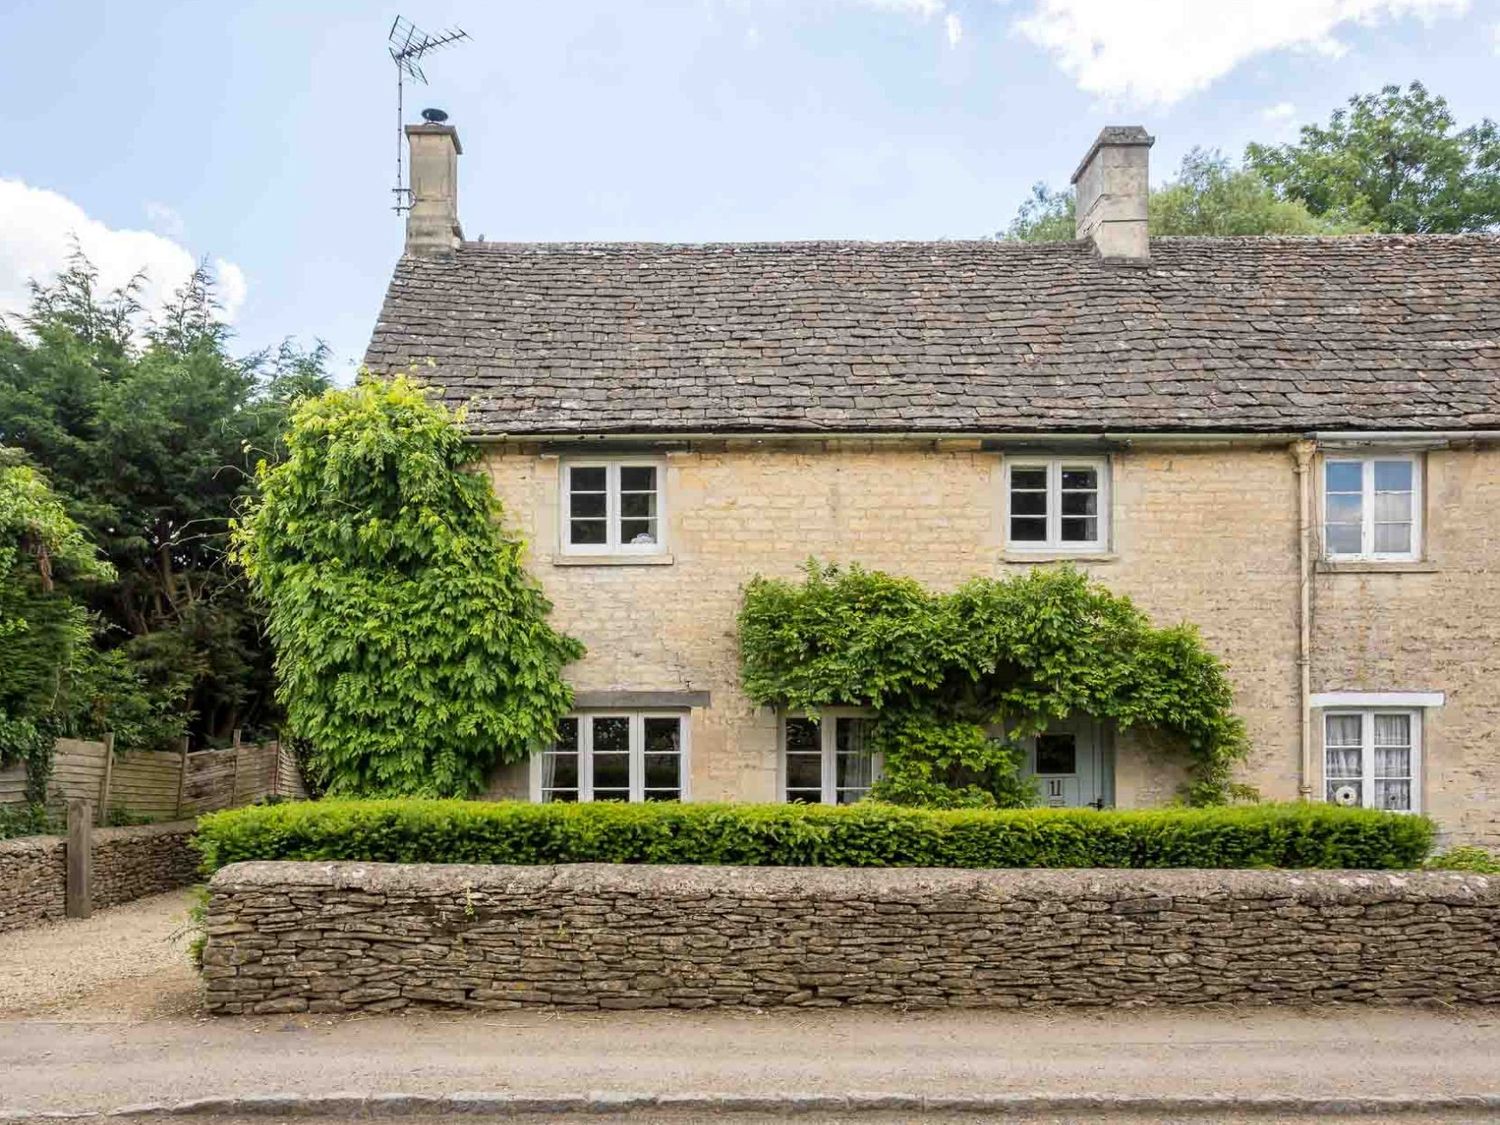 Winterberry Cottage - Cotswolds - 1091236 - photo 1